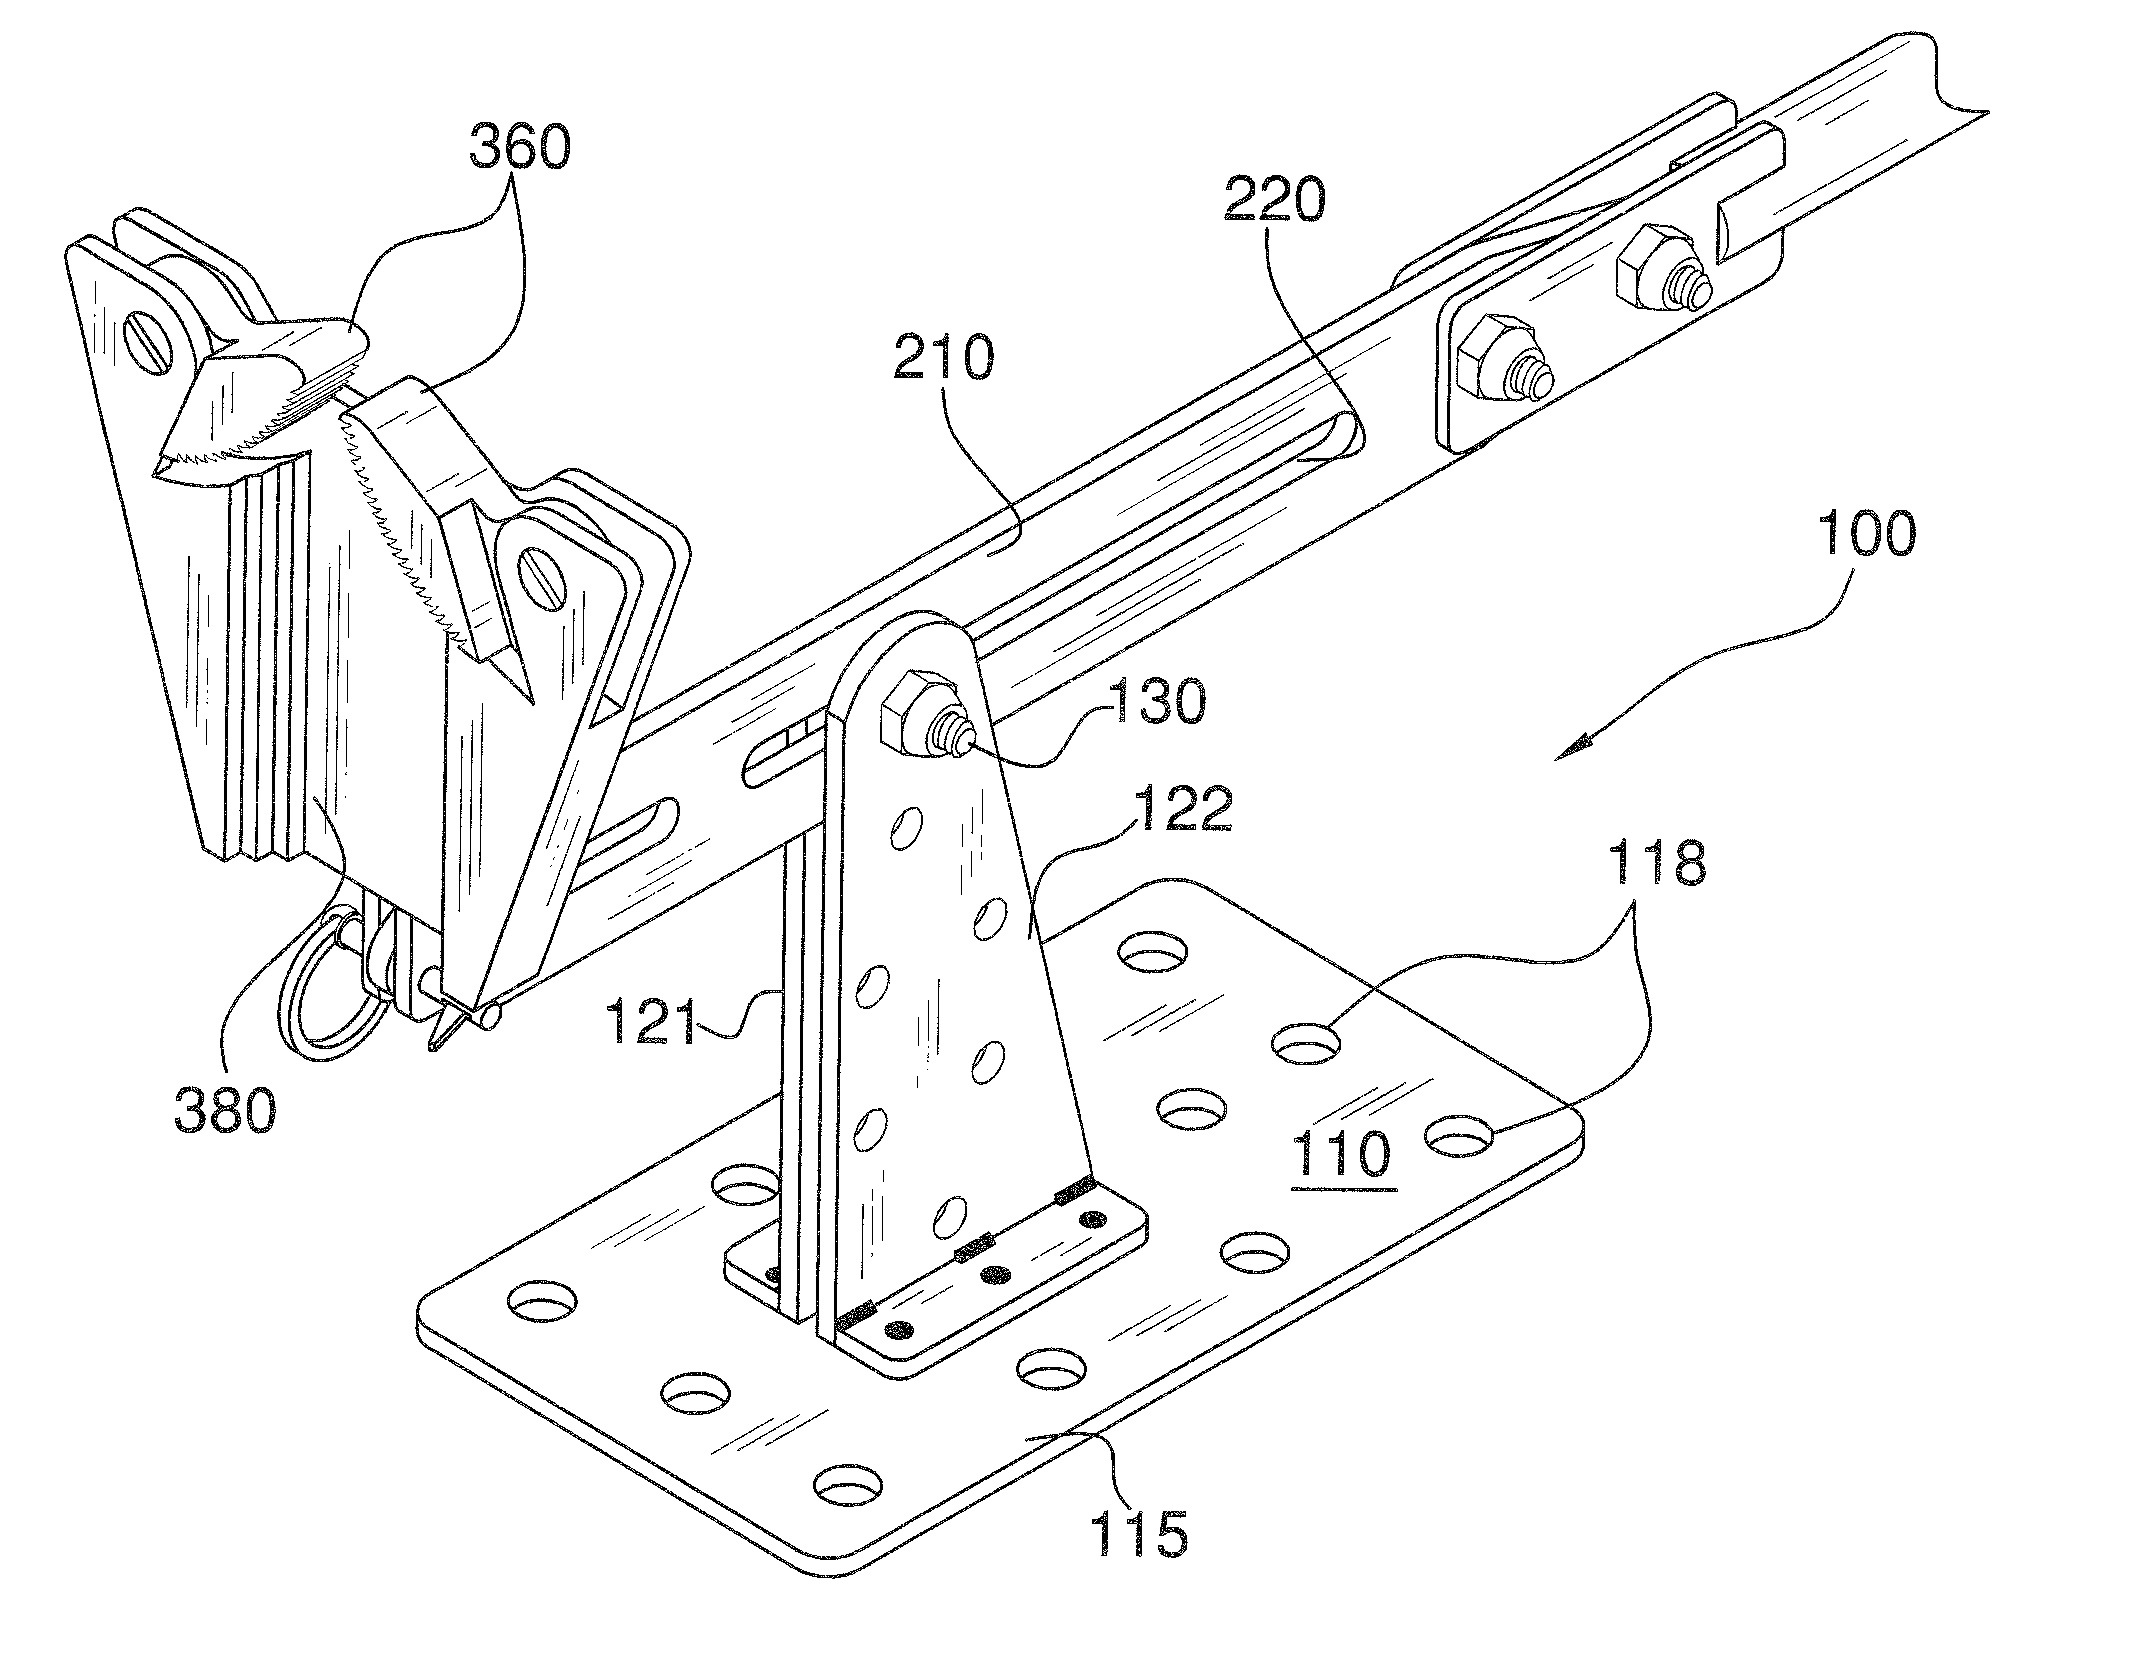 Multi-sized wood and metal stake pulling device